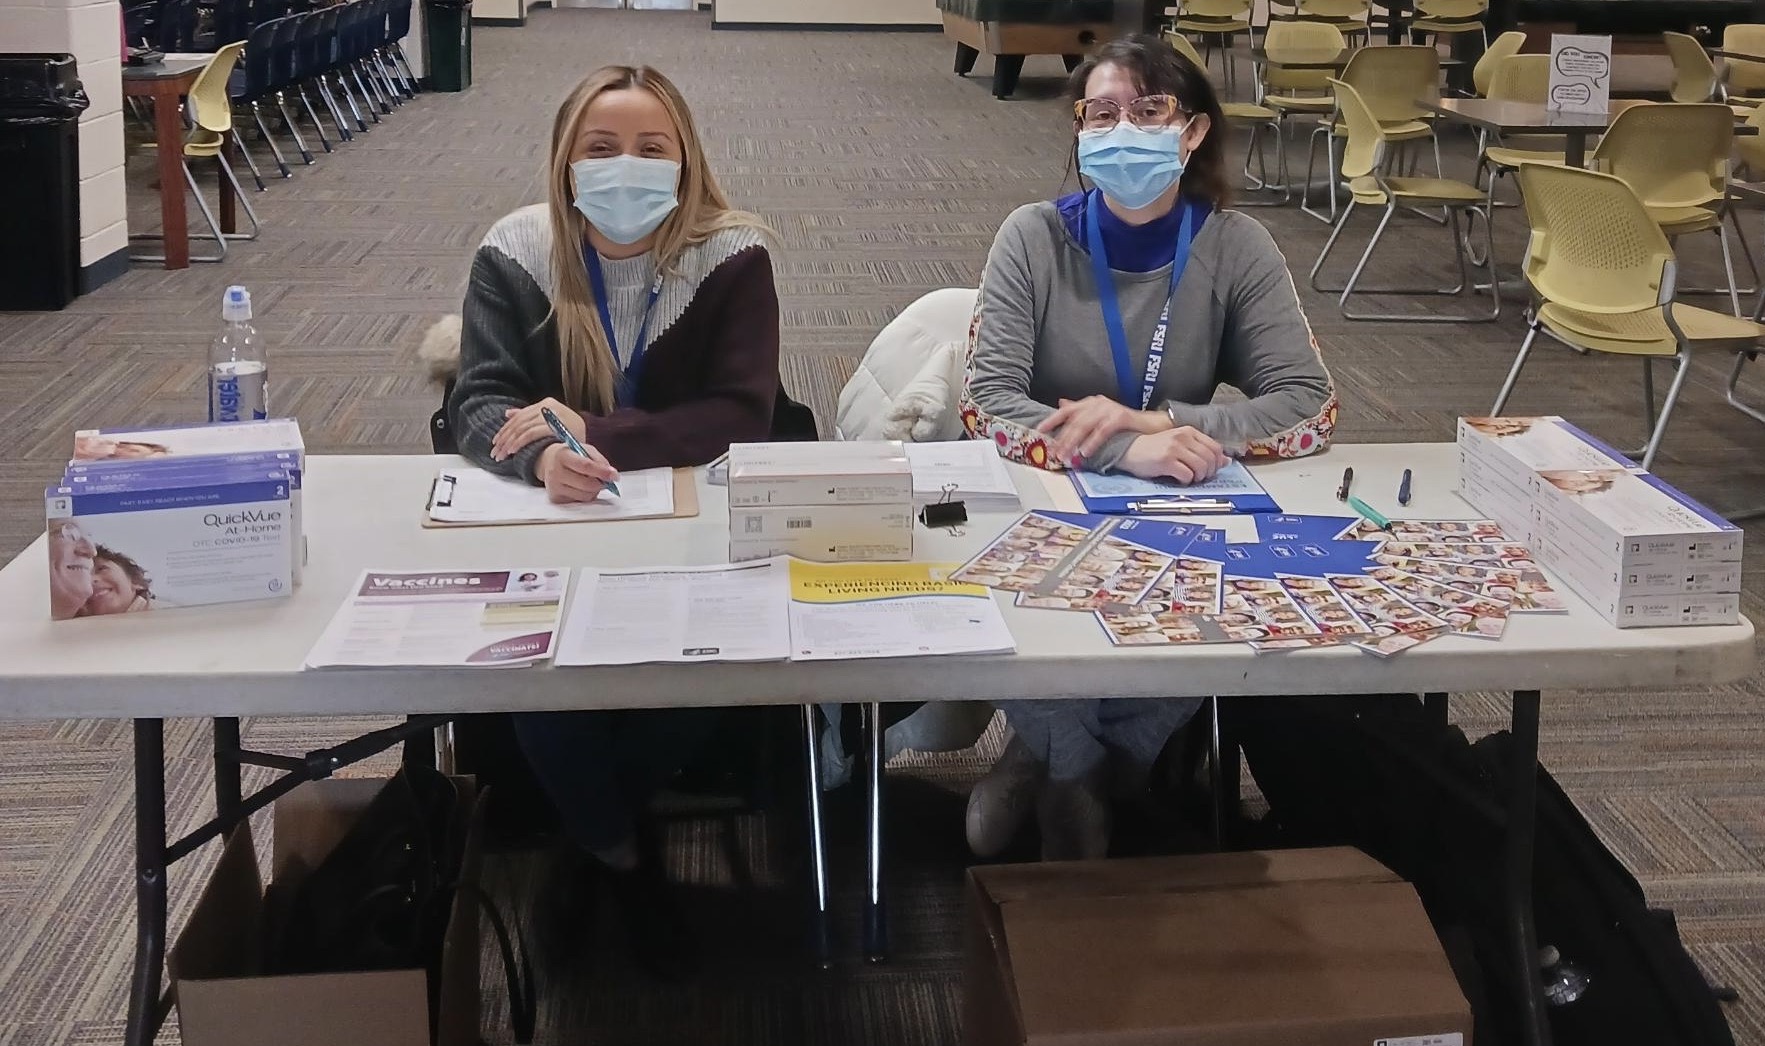 Two women wear masks and sit at a community health event table